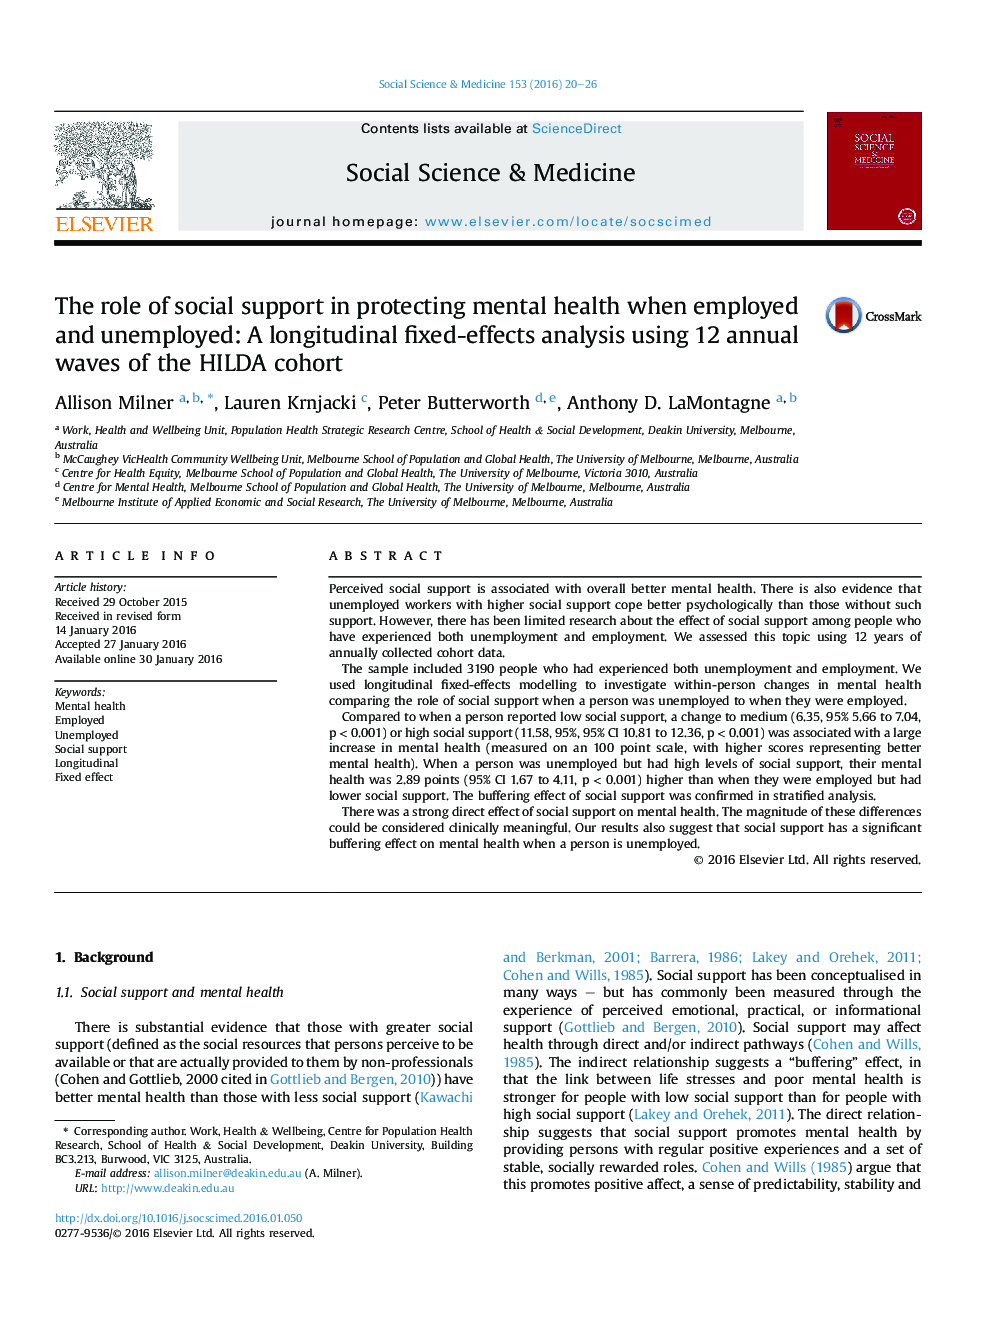 The role of social support in protecting mental health when employed and unemployed: A longitudinal fixed-effects analysis using 12 annual waves of the HILDA cohort